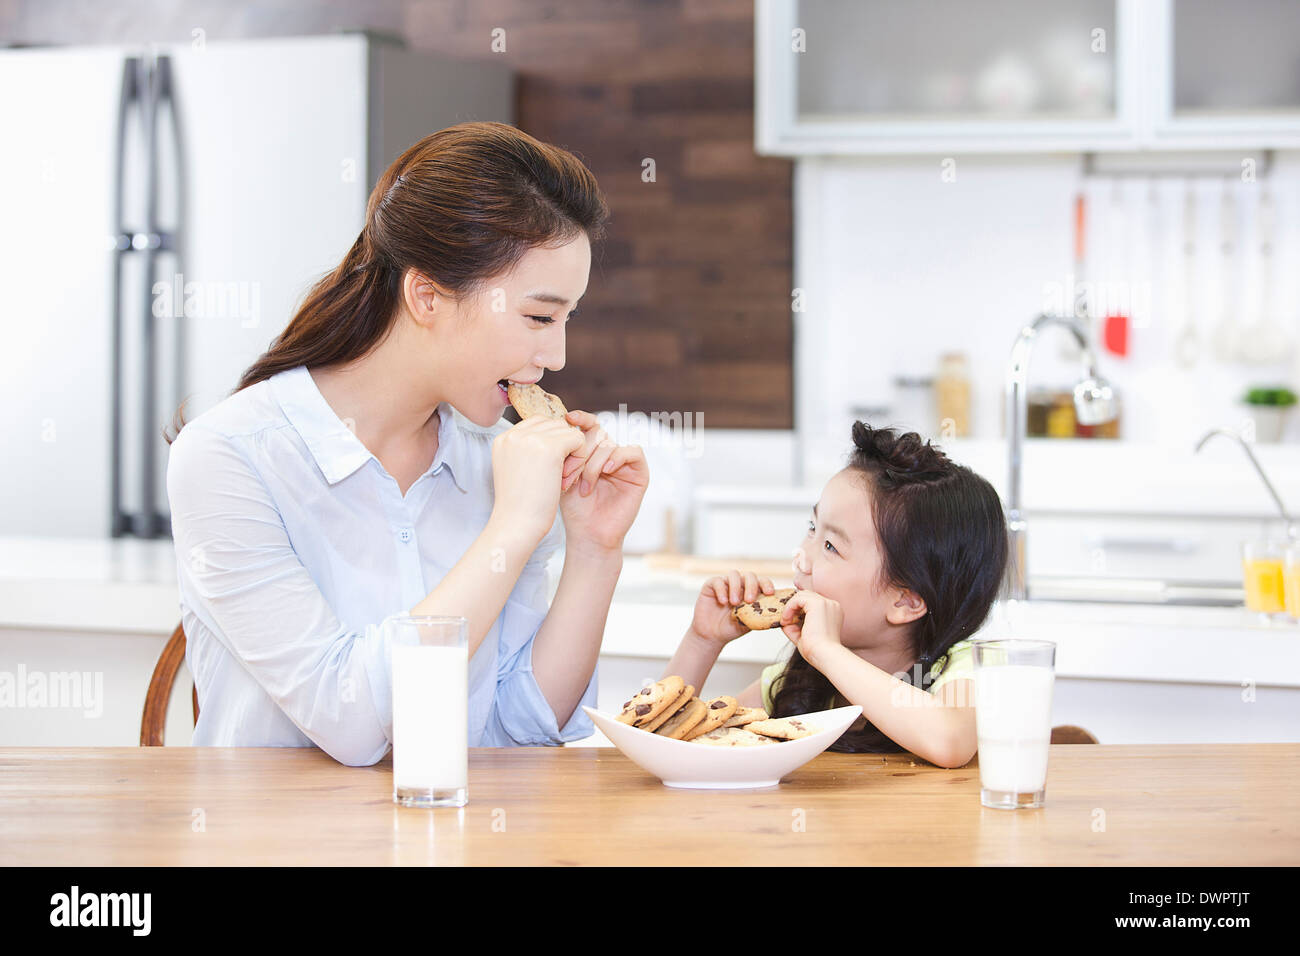 a mother and a daughter enjoying cookies in the kitchen Stock Photo